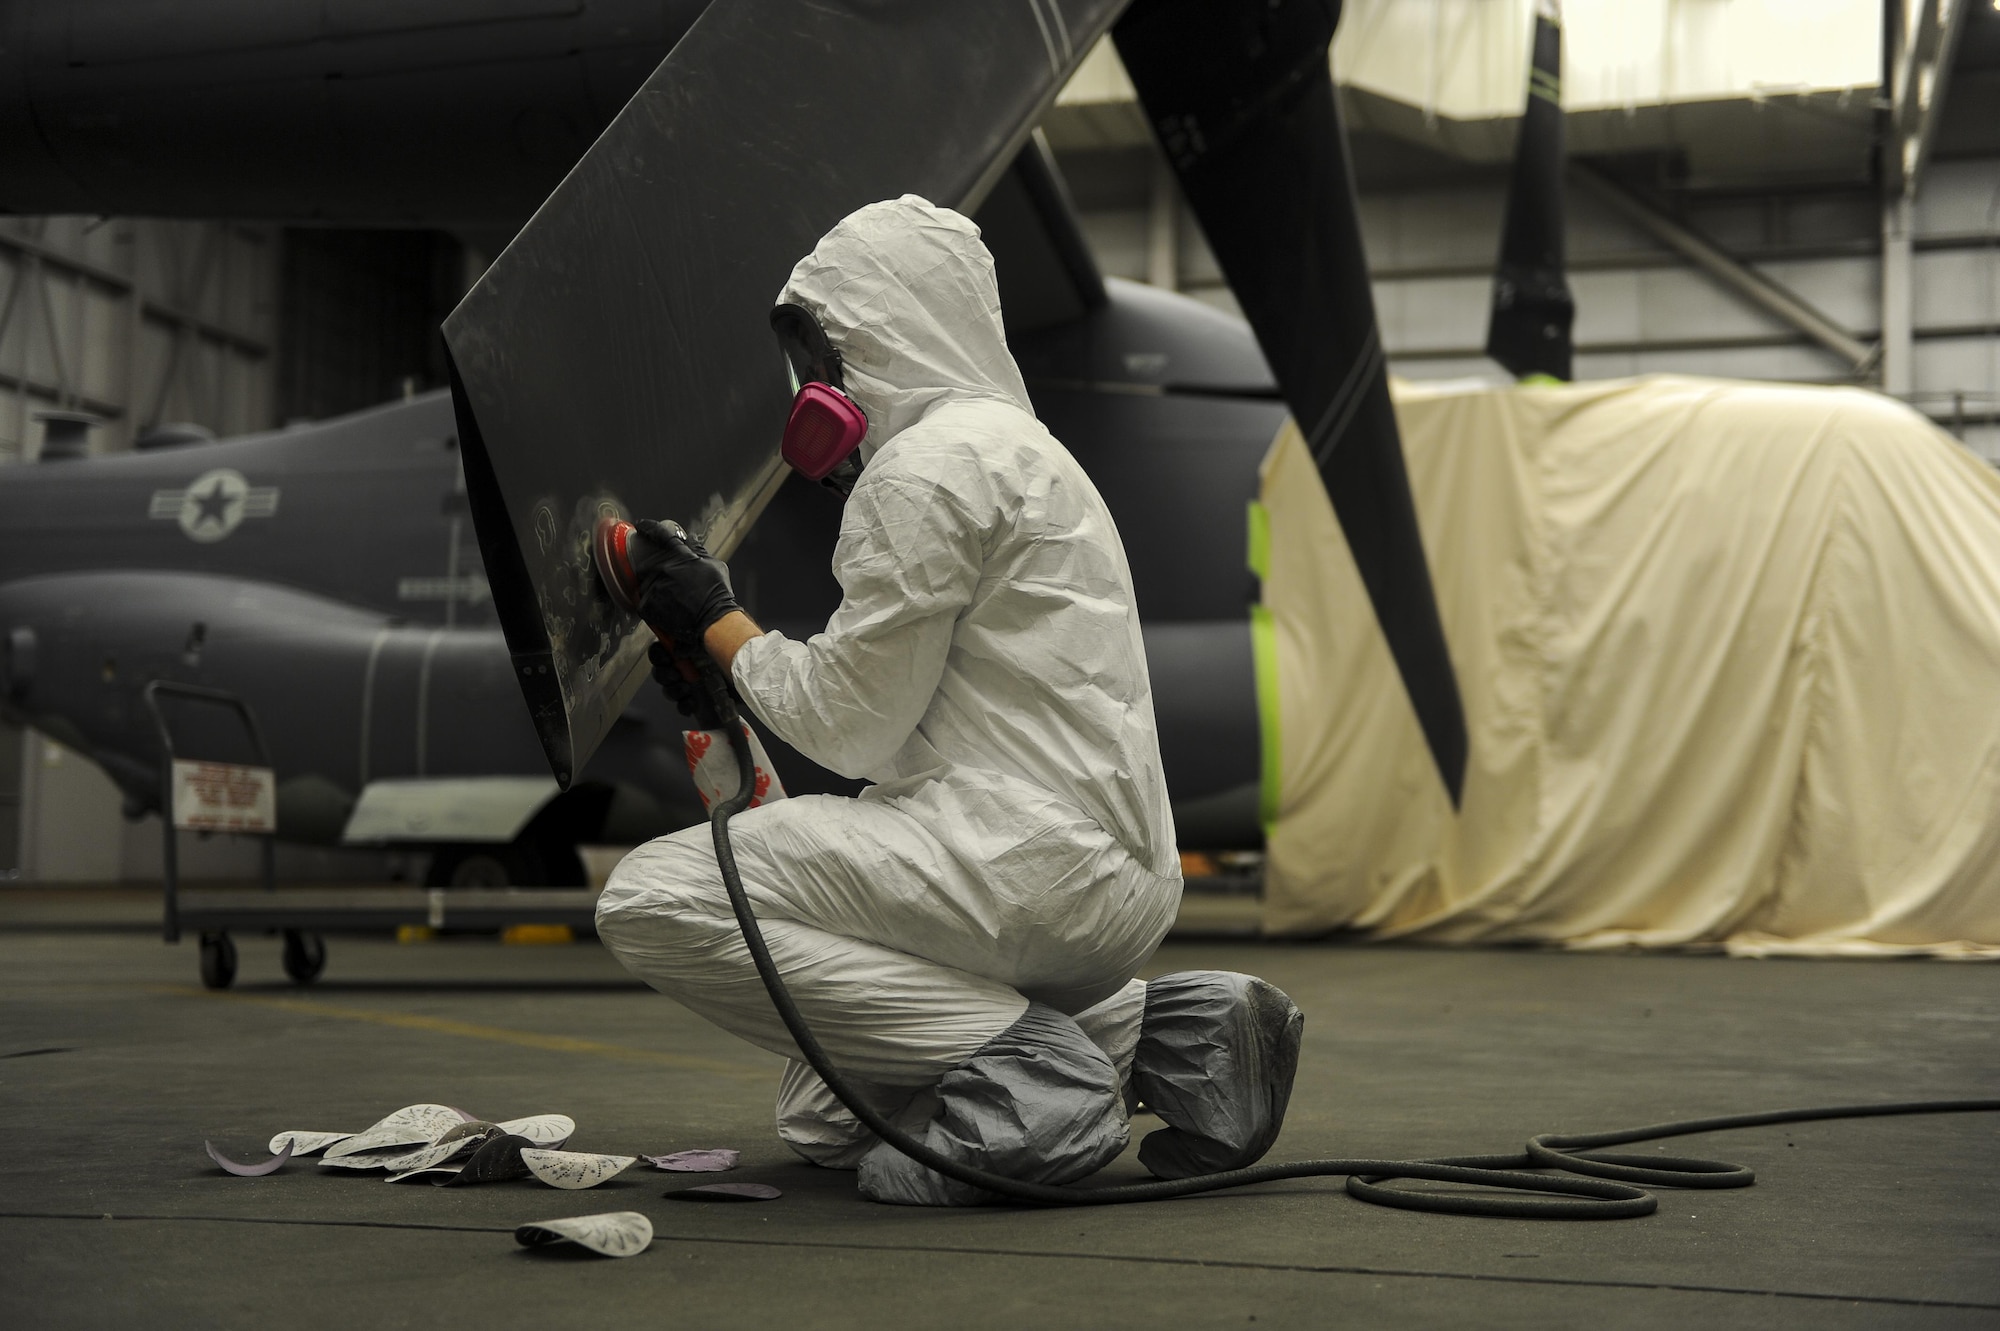 Airman 1st Class Ethan Short, an aircraft structural maintainer with the 1st Special Operations Maintenance Squadron, sands down a propeller to remove paint from a CV-22 Osprey at Hurlburt Field, Fla., March 28, 2017. Sanding down the equipment is the first step in a several day process to ensure the new primer and paint adhere to the surface of the aircraft. (U.S. Air Force photo by Airman 1st Class Isaac O. Guest IV)